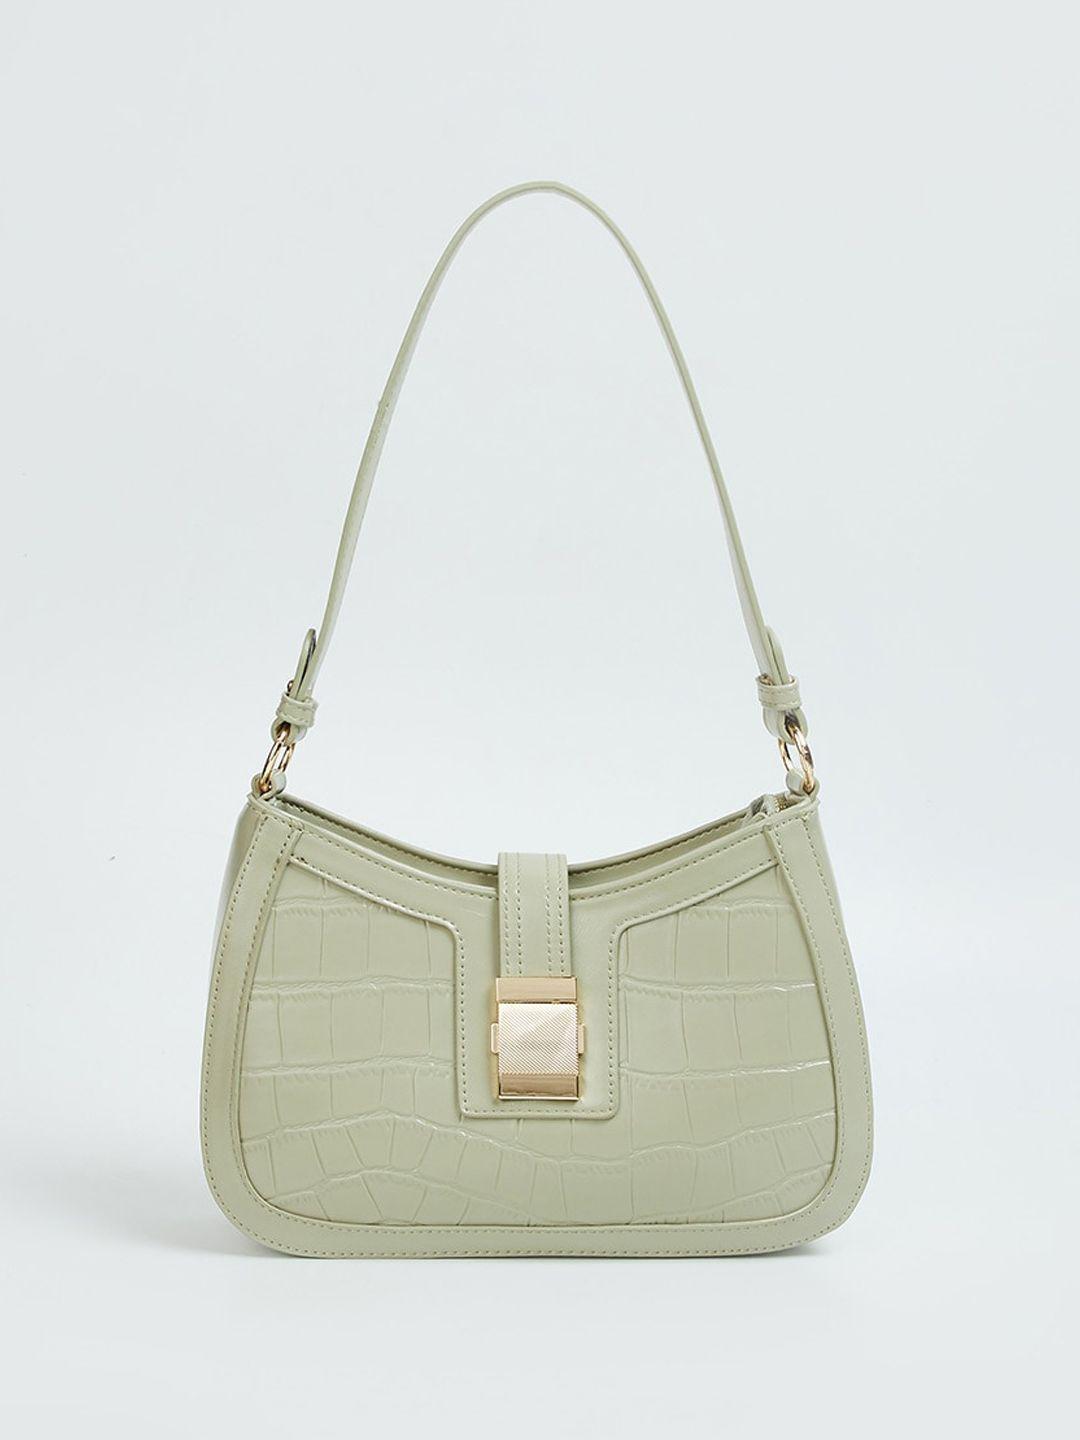 code by lifestyle textured structured handheld bag